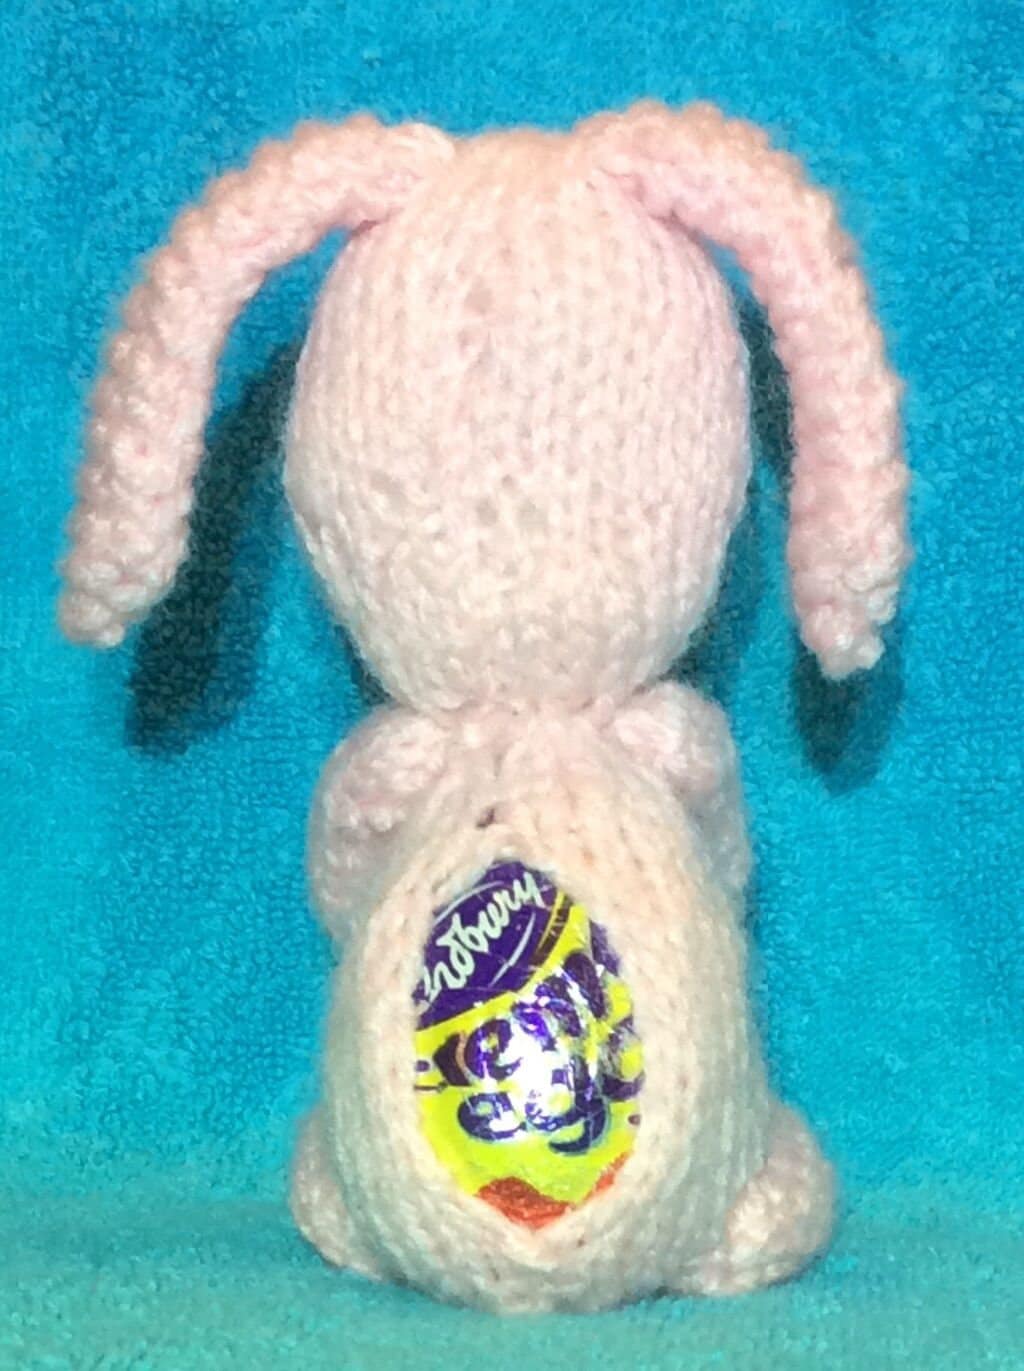 KNITTING PATTERN - Easter Betty the Bunny chocolate cover fits Creme Egg